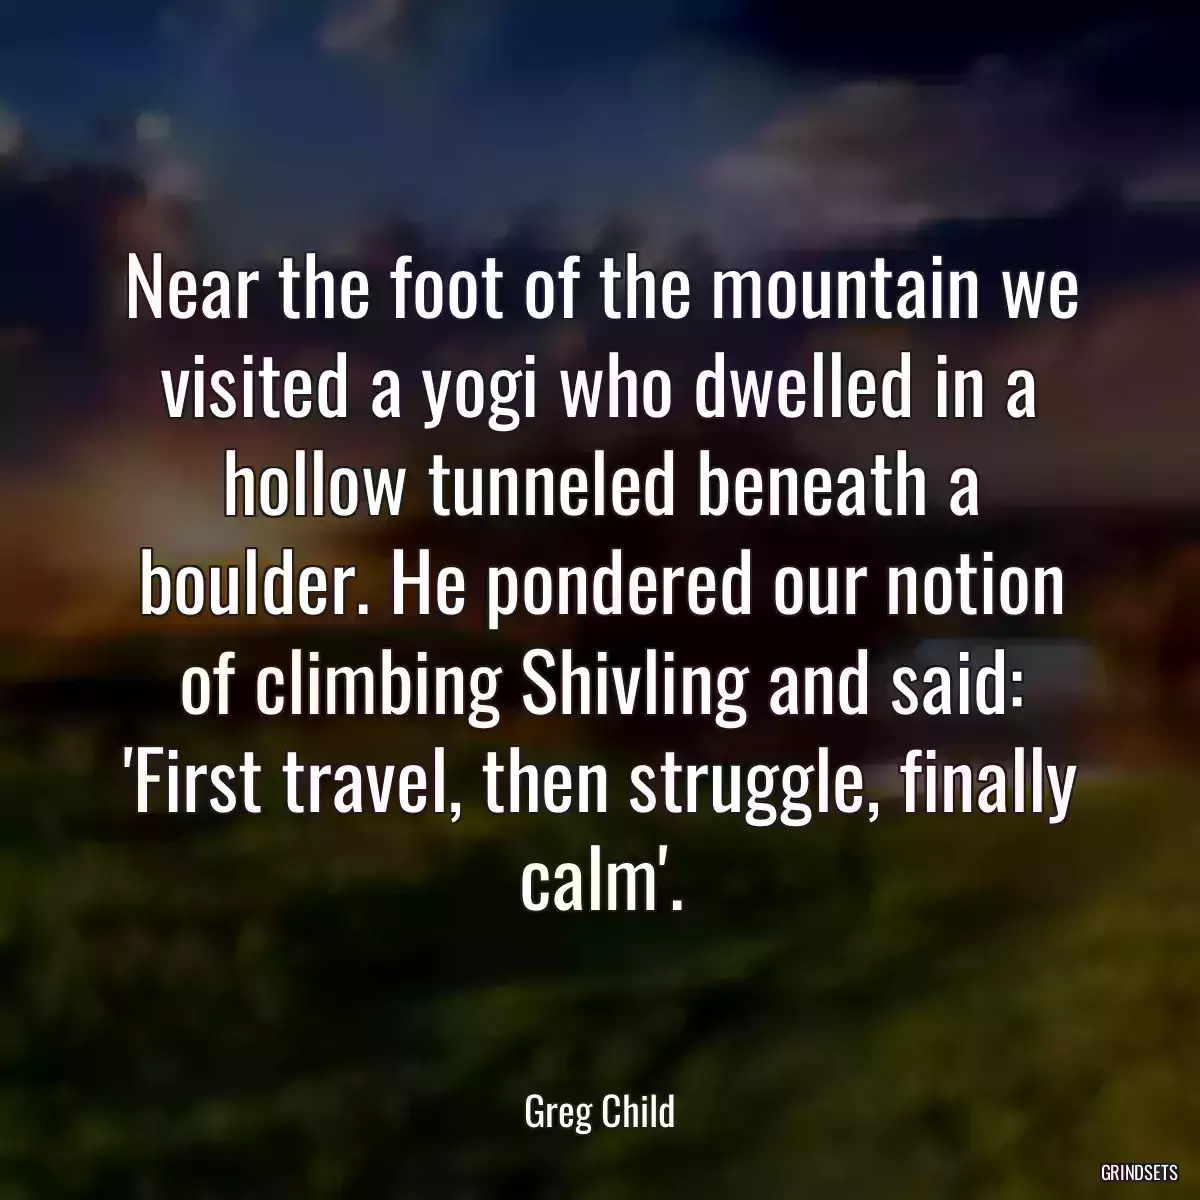 Near the foot of the mountain we visited a yogi who dwelled in a hollow tunneled beneath a boulder. He pondered our notion of climbing Shivling and said: \'First travel, then struggle, finally calm\'.